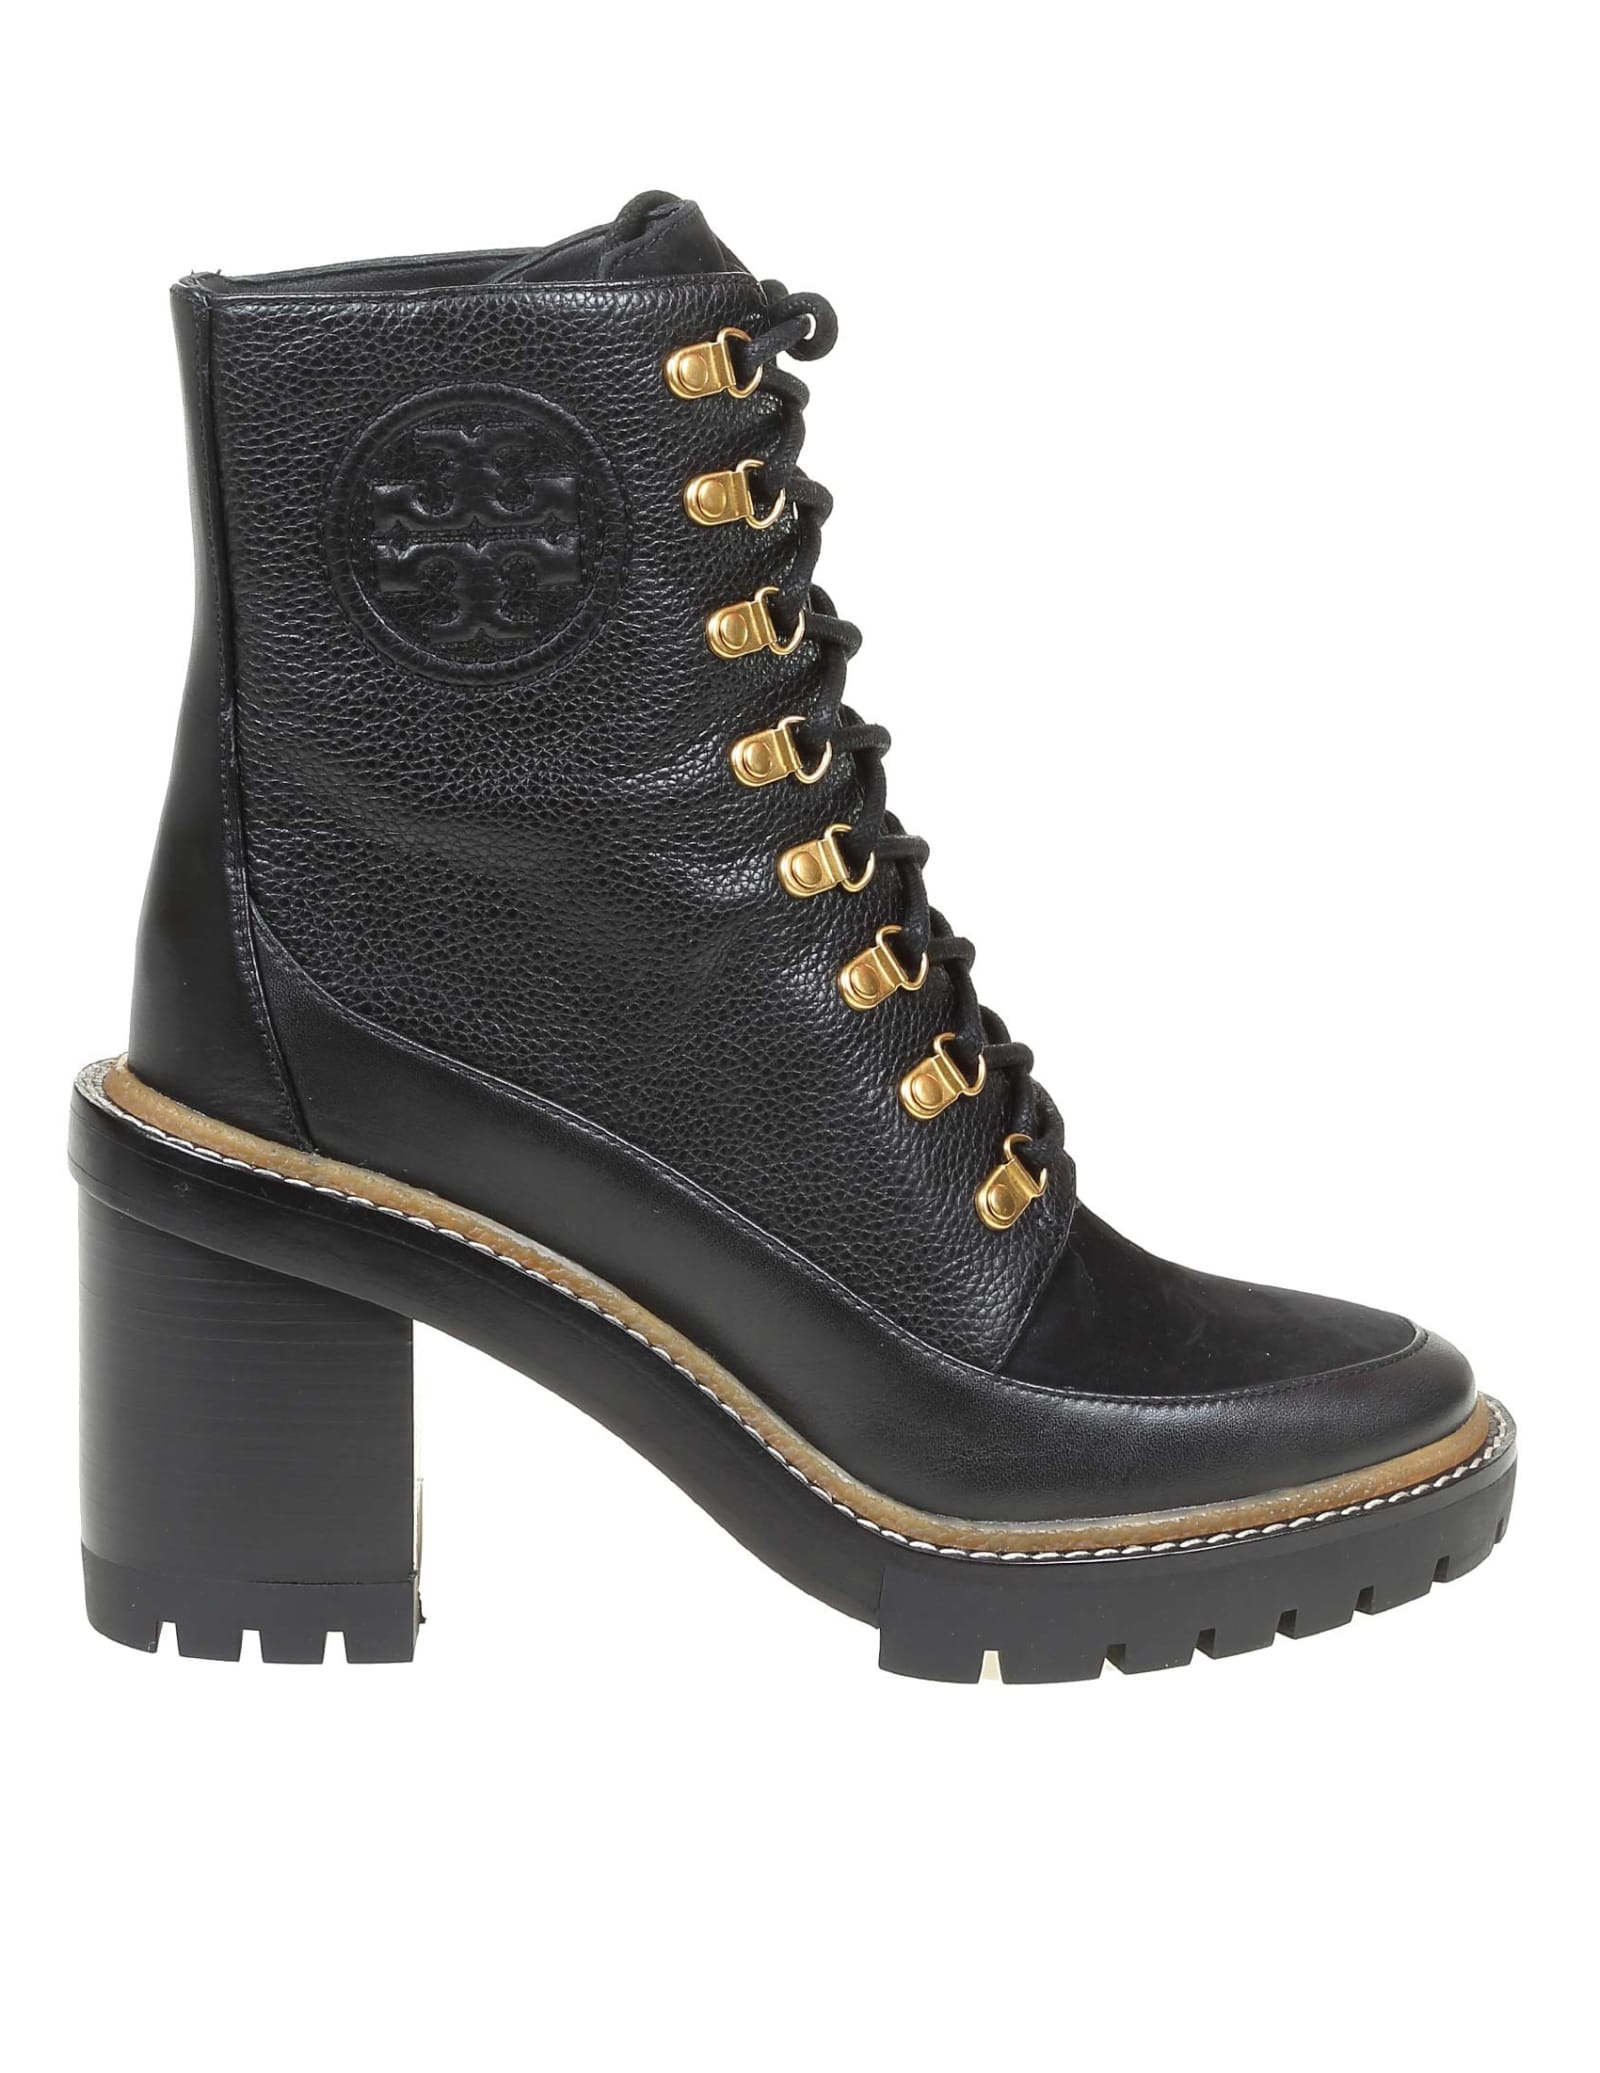 Buy Tory Burch Miller Boots In Black Leather online, shop Tory Burch shoes with free shipping